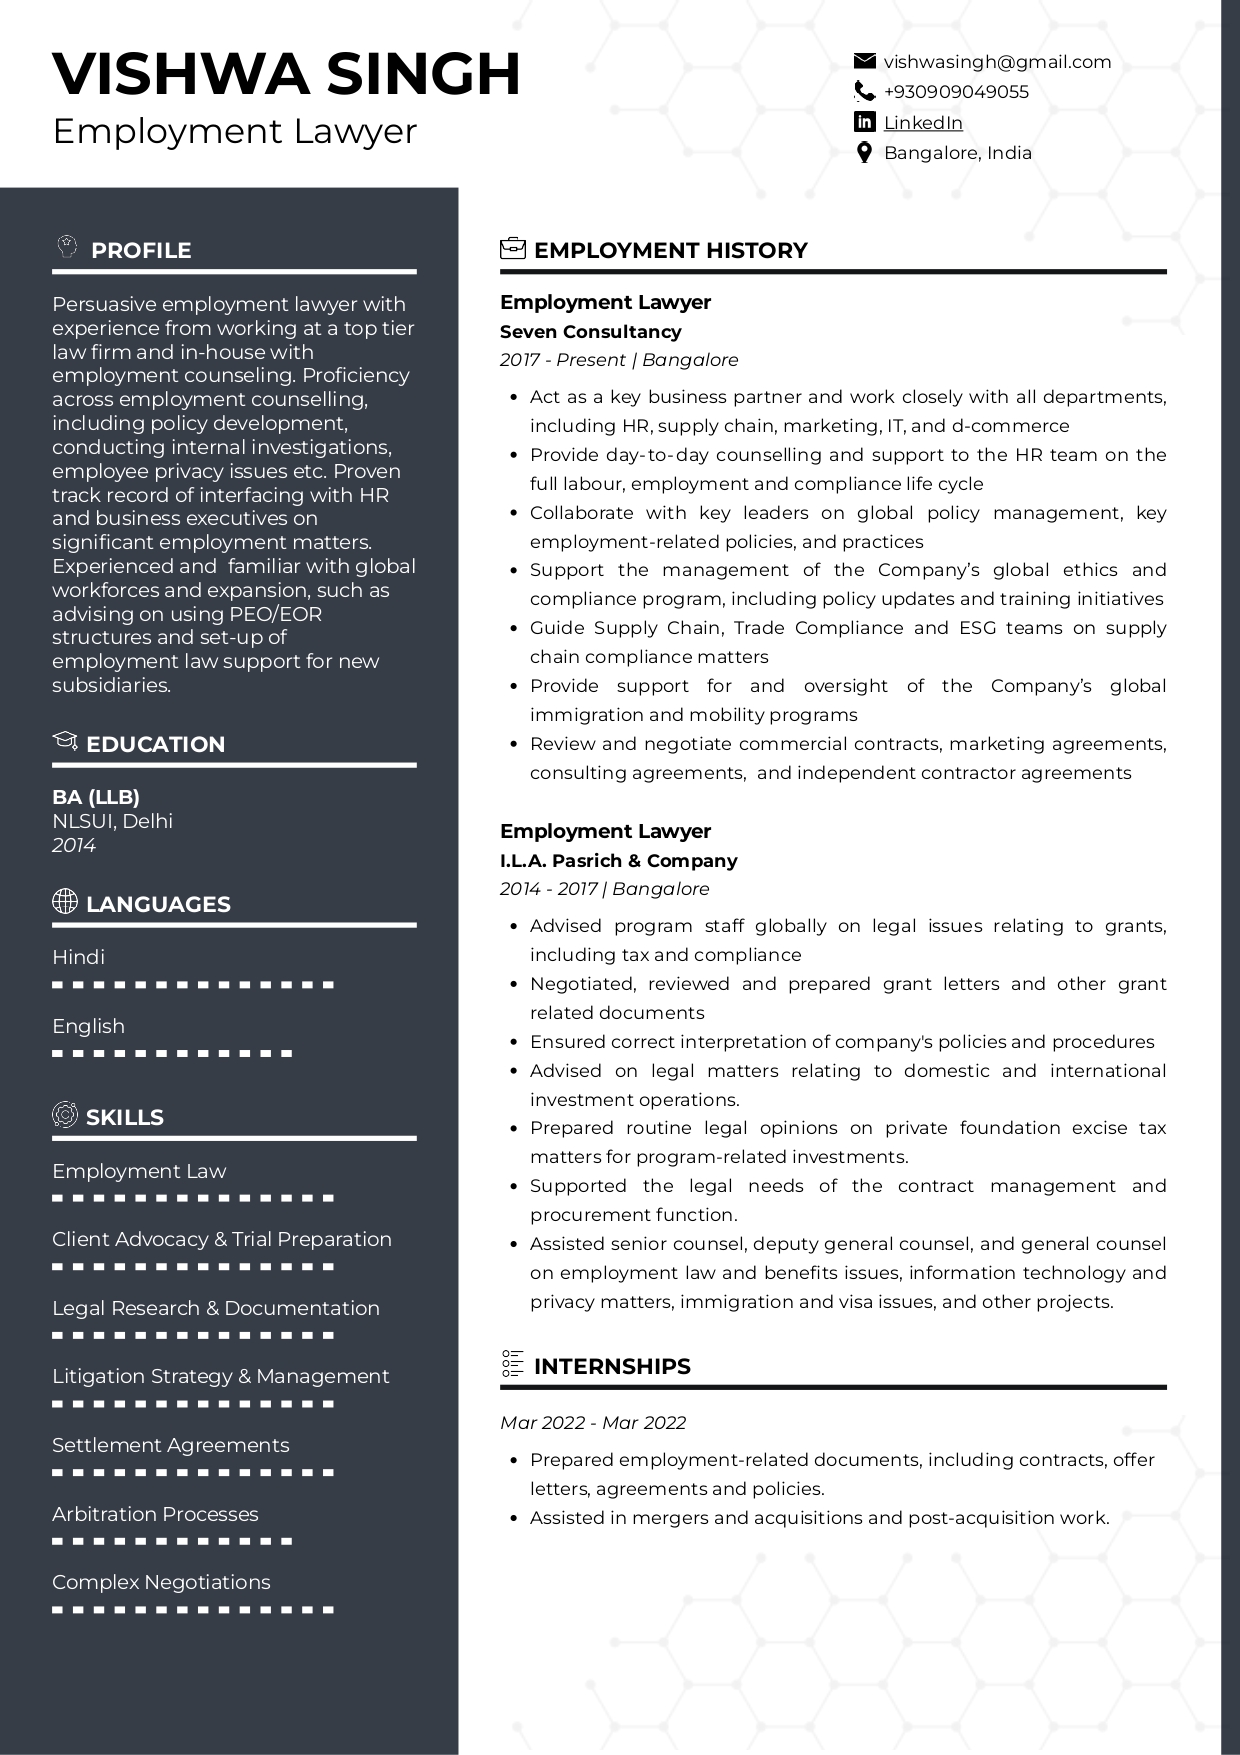 Resume of Employment Lawyer